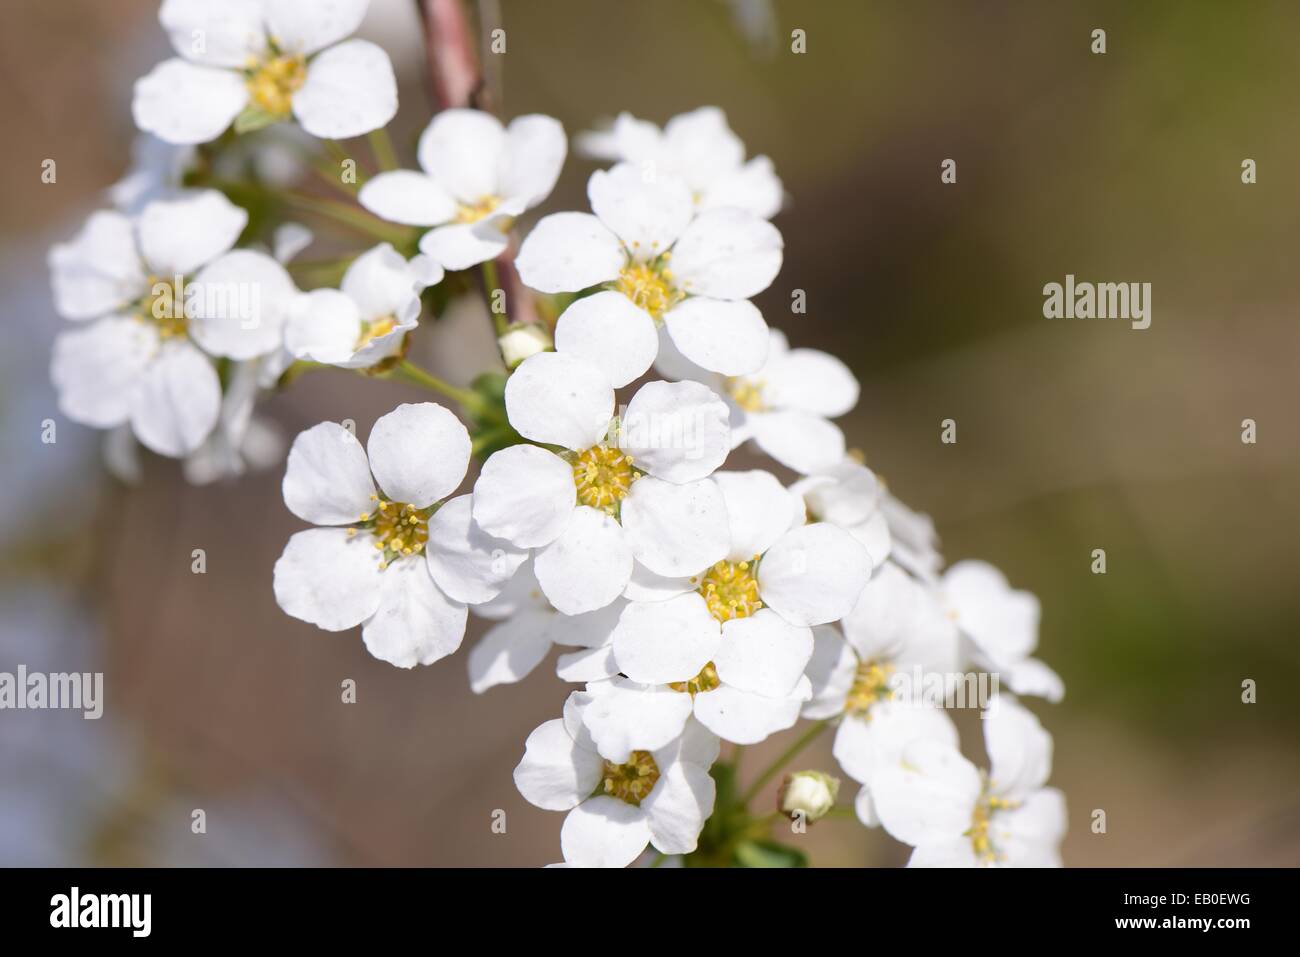 Closeup of white colored bridal wreath flowers Stock Photo